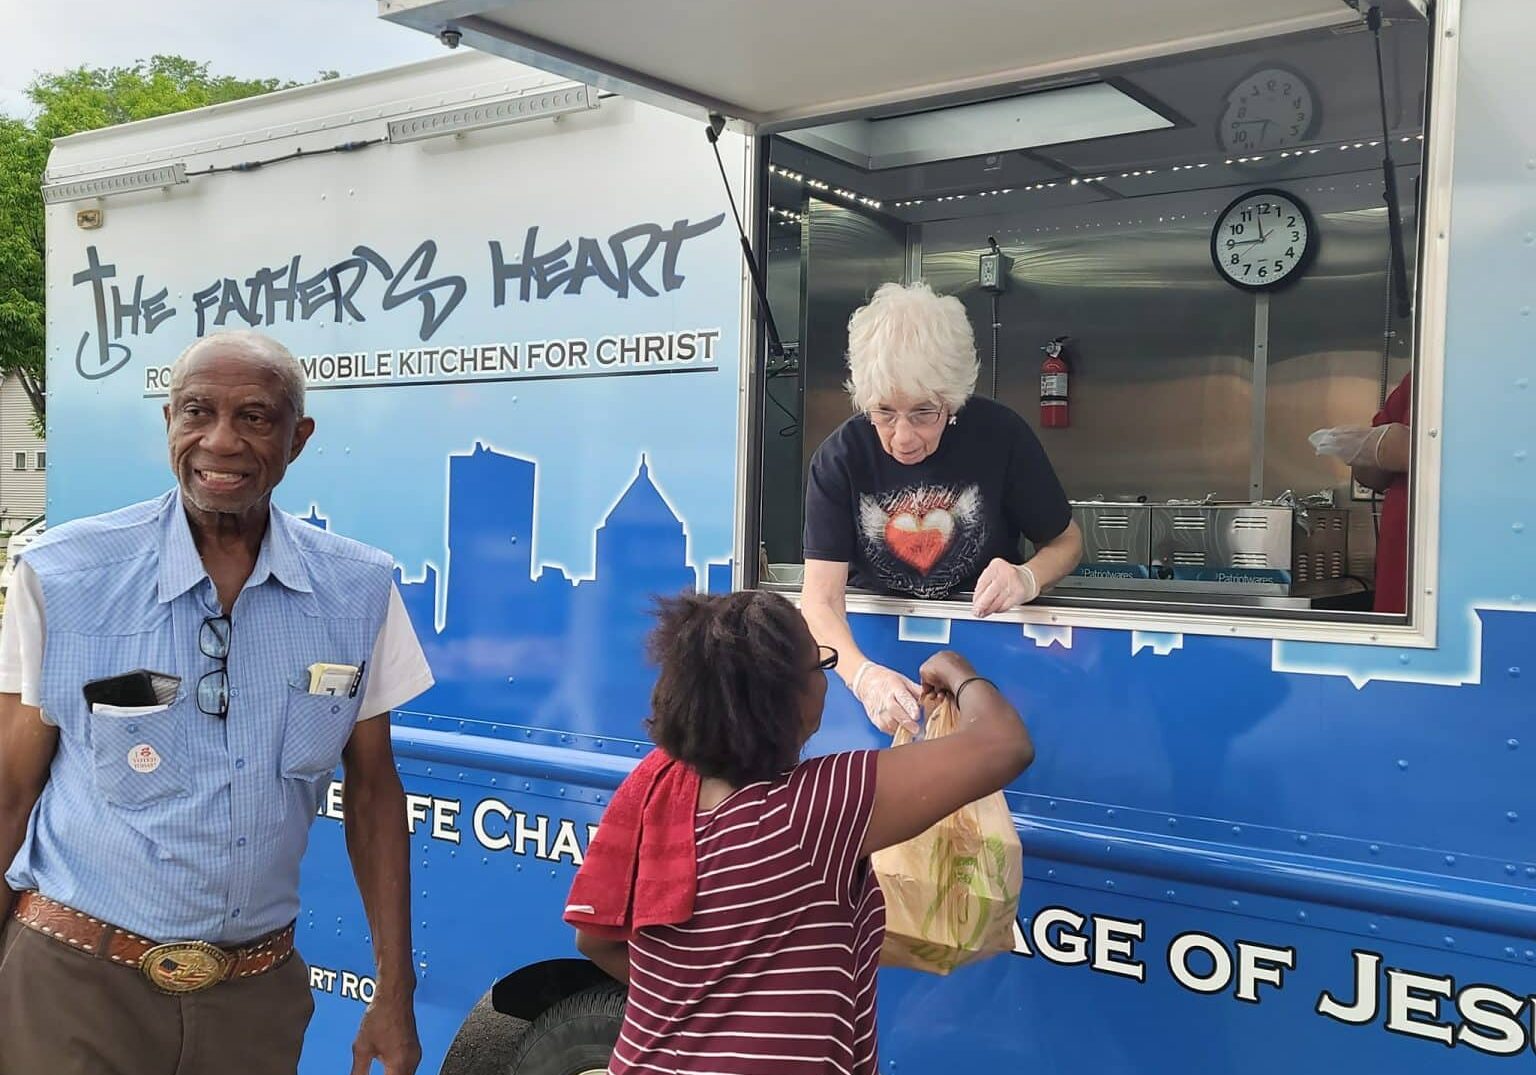 TFH Rochester, NY | Hot meals are served from the mobile kitchen on Chili Avenue Sept.-Oct. 2022